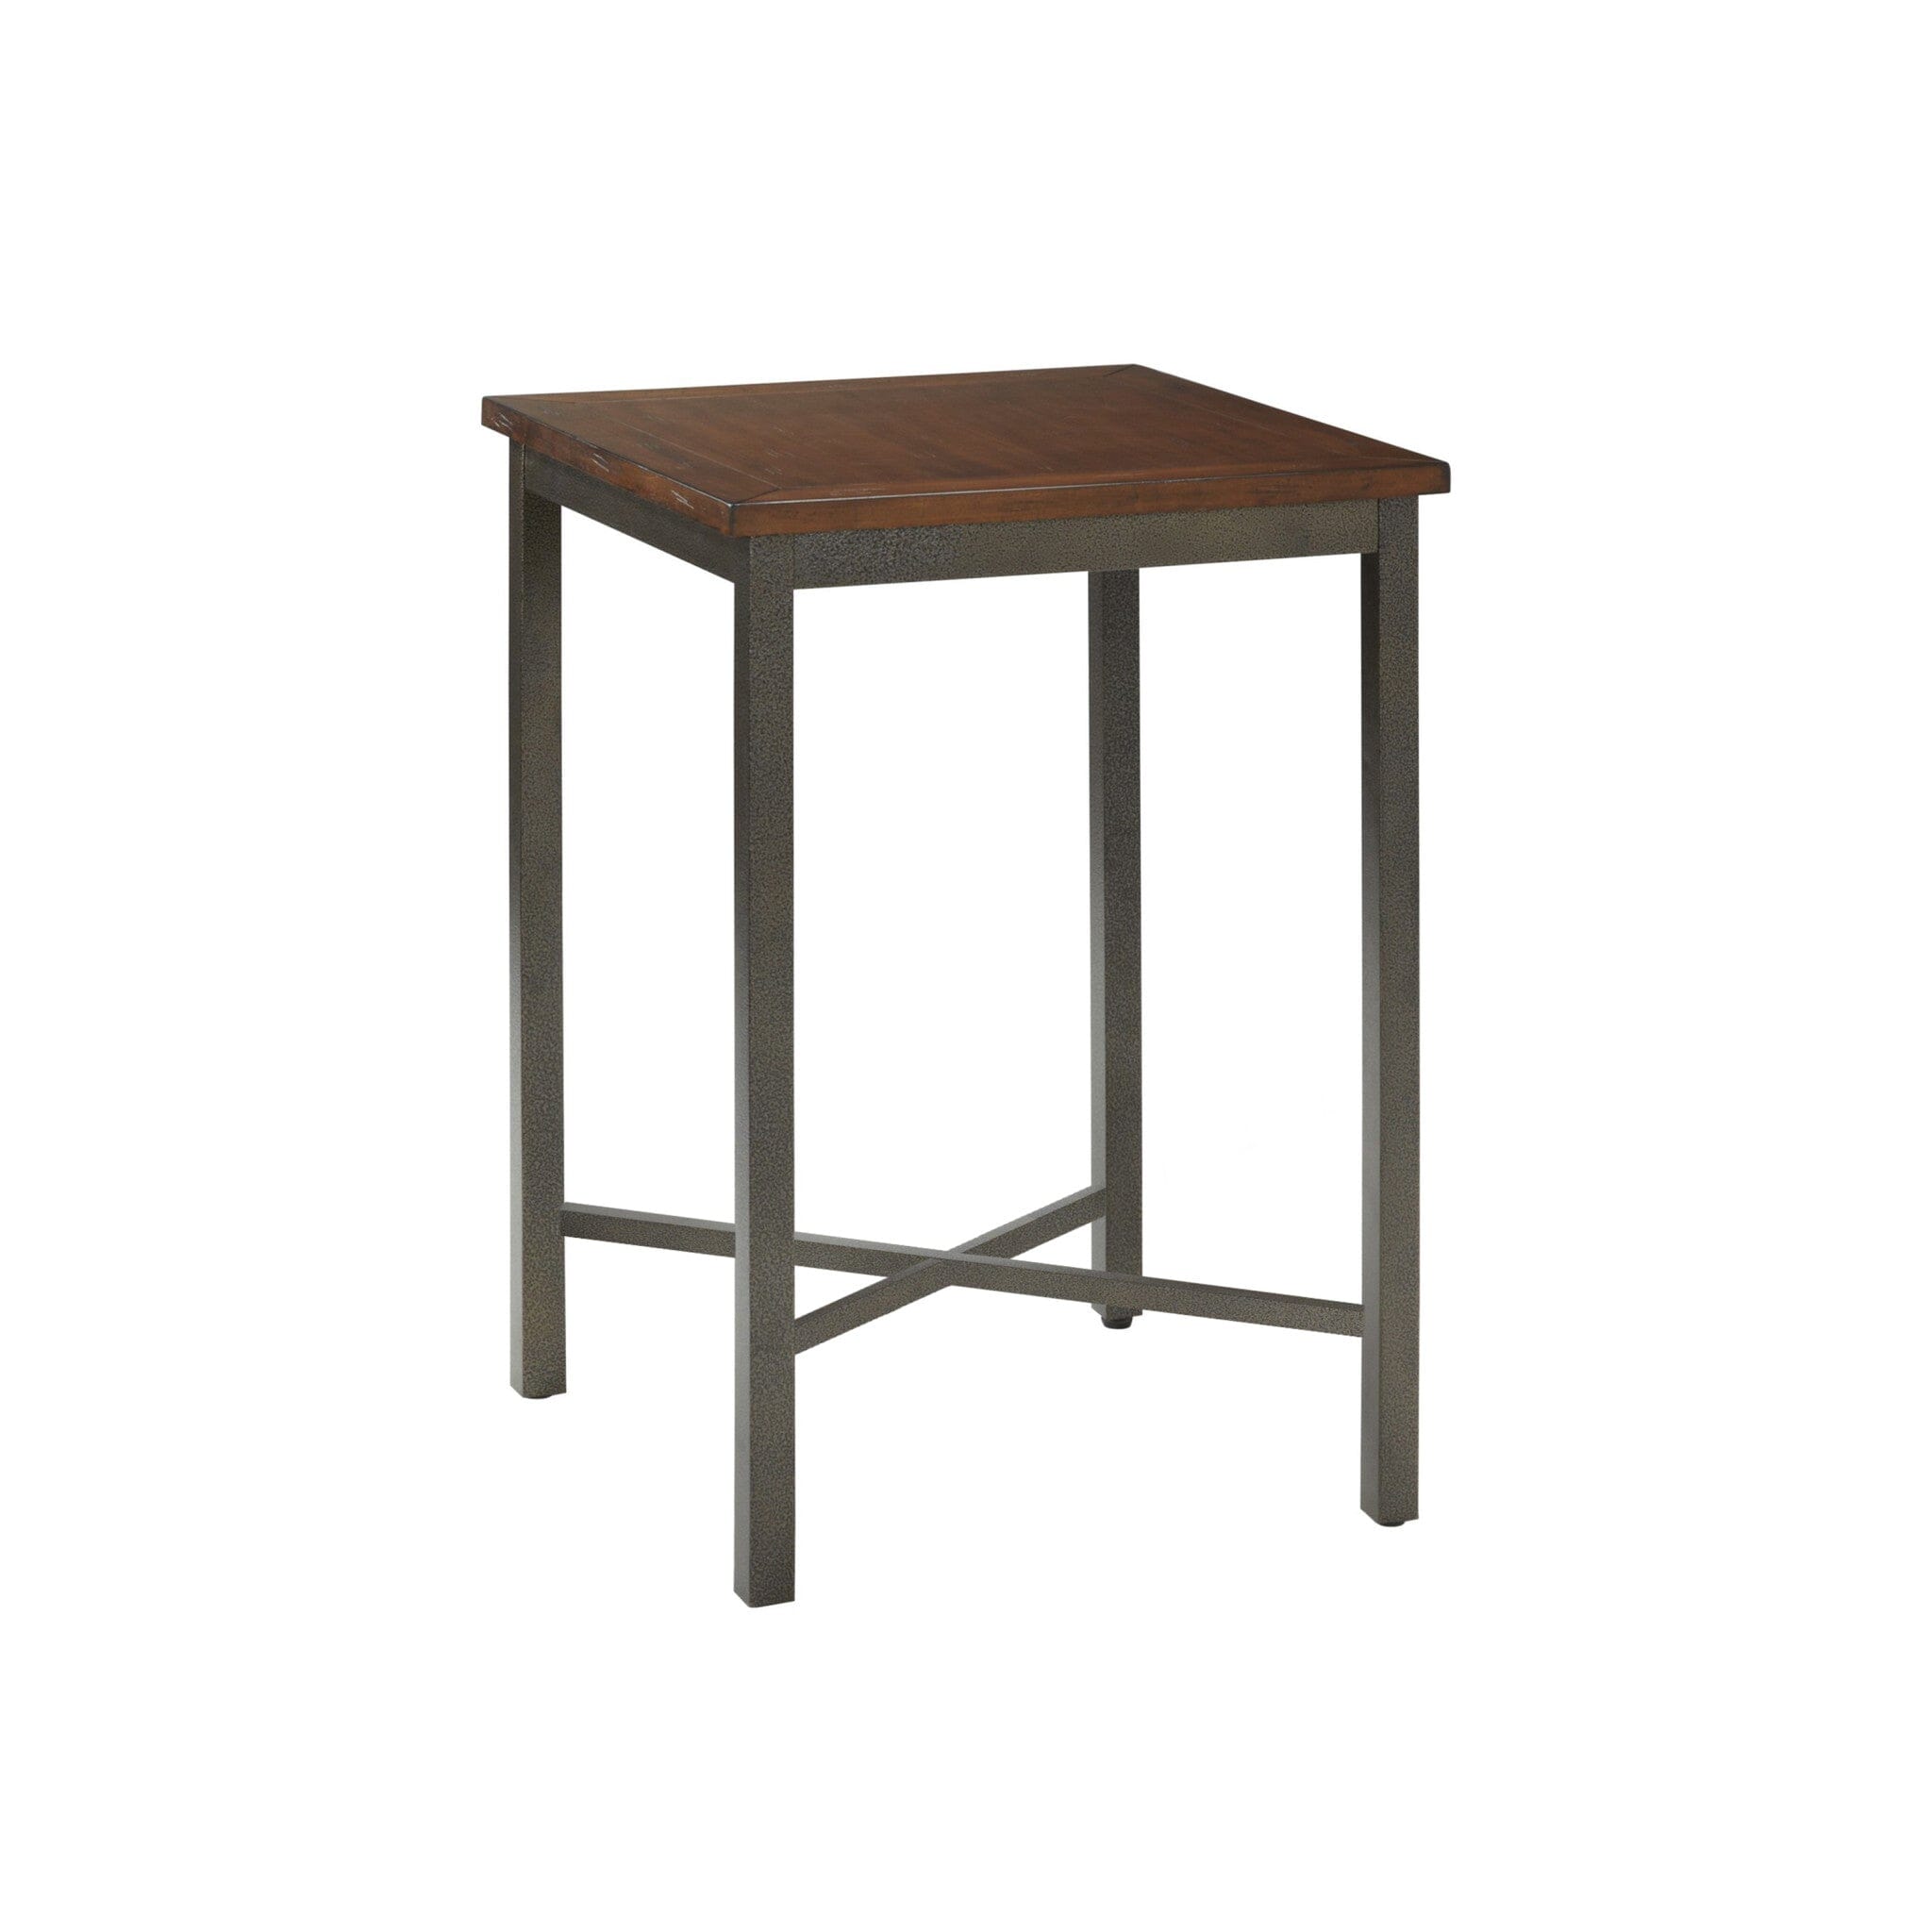 Cabin Bar Table By Cabin Creek Dining Table & Chairs Cabin Creek